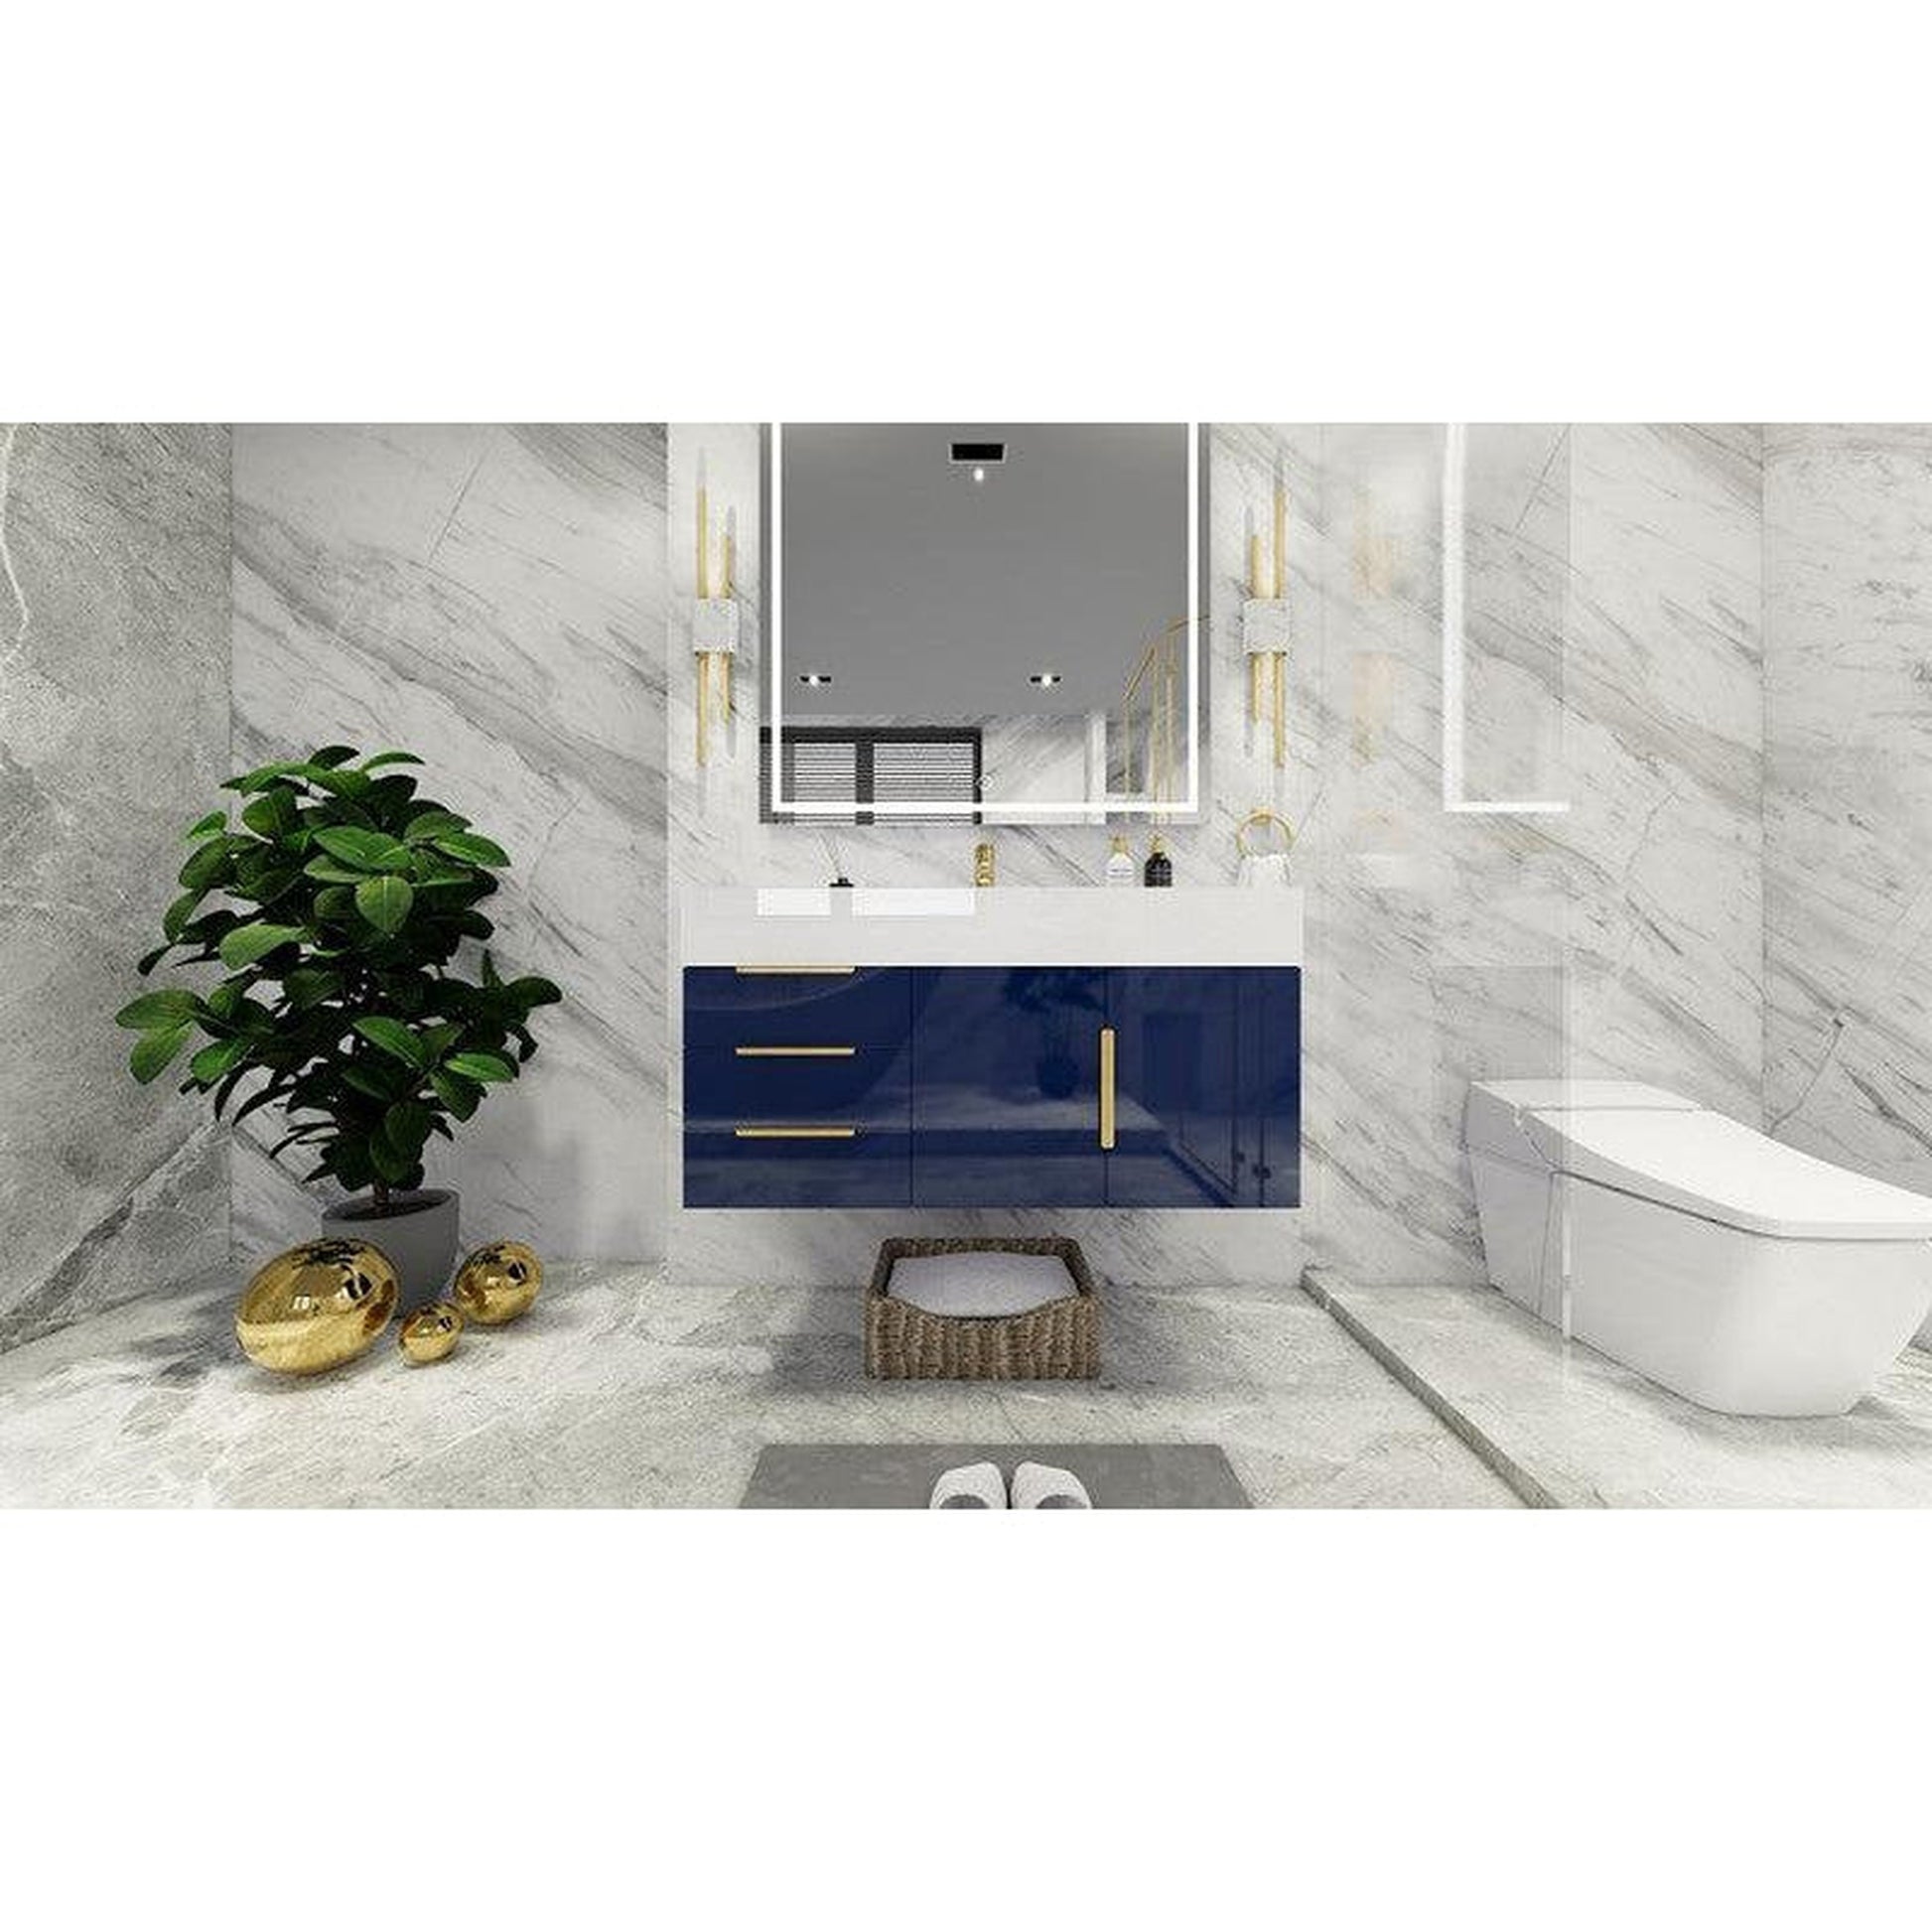 Moreno Bath Bethany 42" High Gloss Night Blue Wall-Mounted Vanity With Left Side Drawers and Single Reinforced White Acrylic Sink